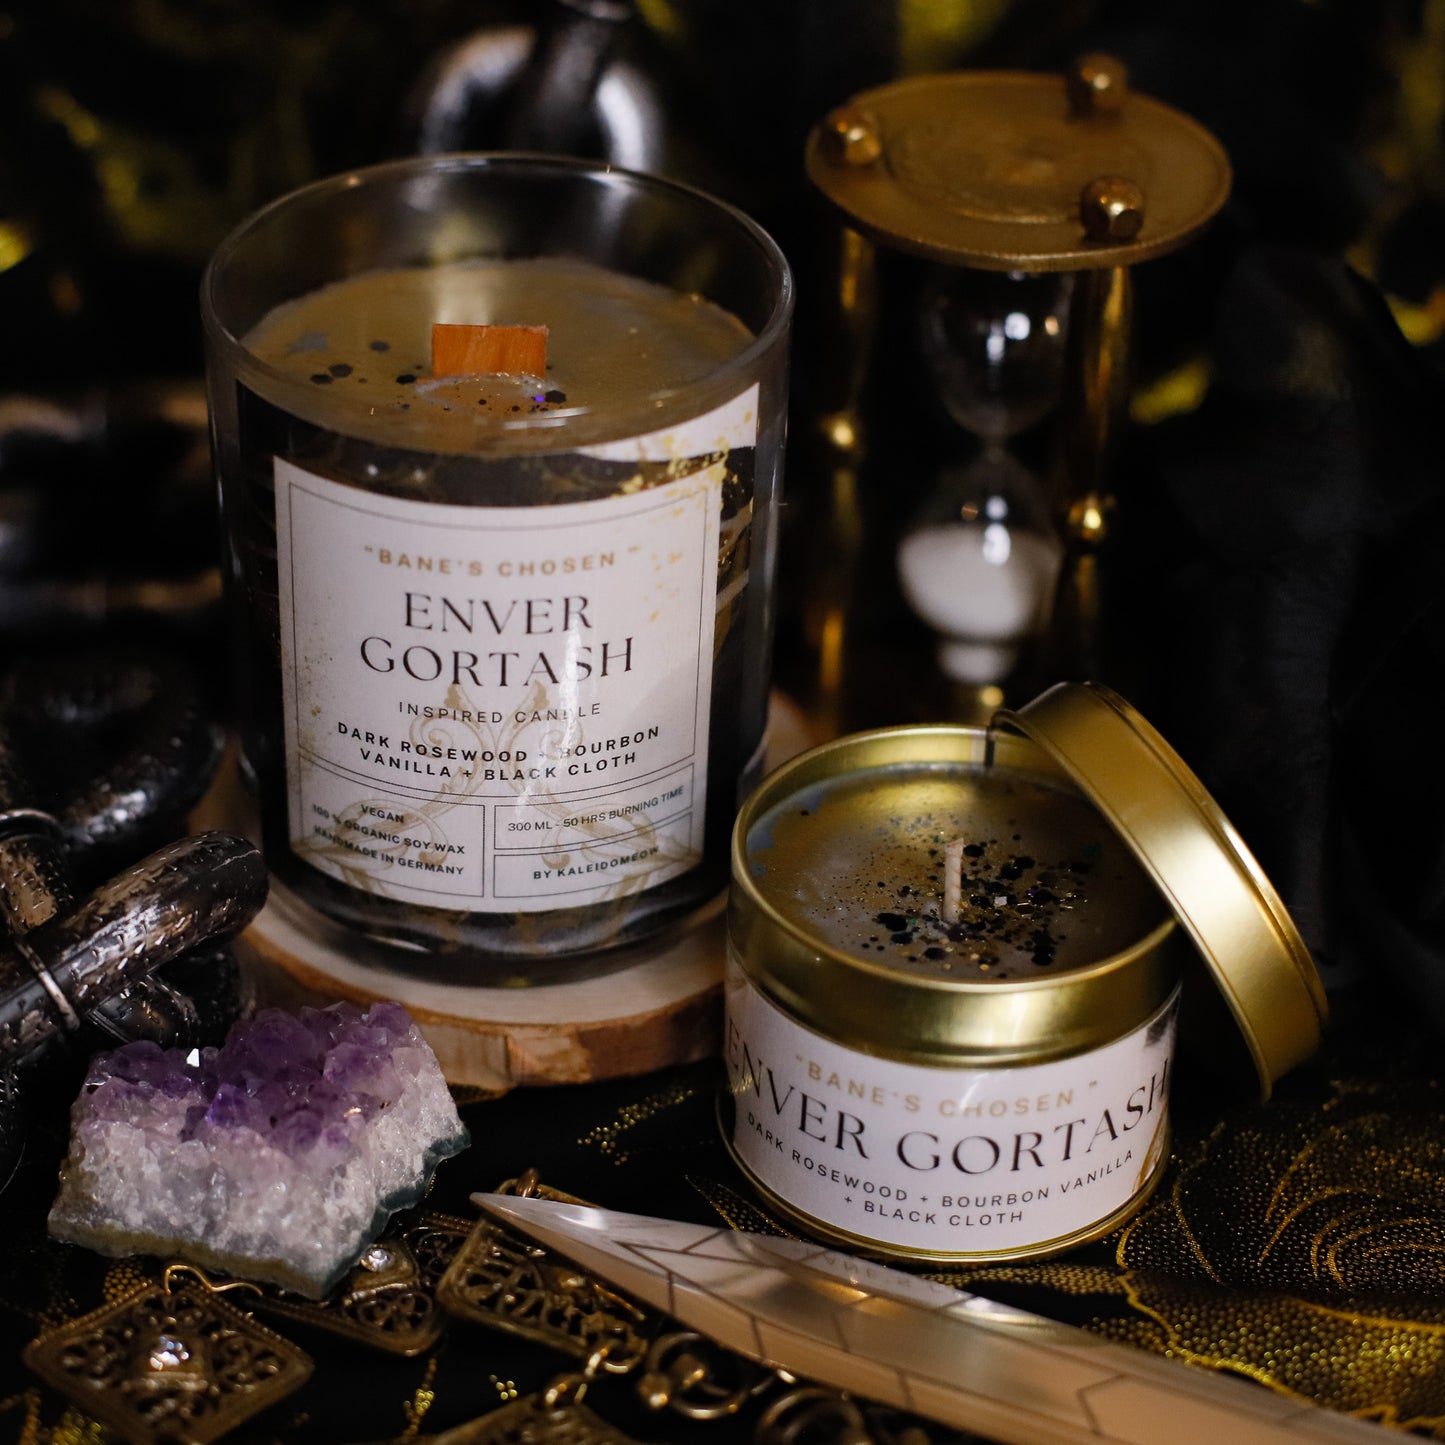 GORTASH inspired scented candle - 'Bane's Chosen' Baldur's Gate 3 inspired soy candle 100 ML